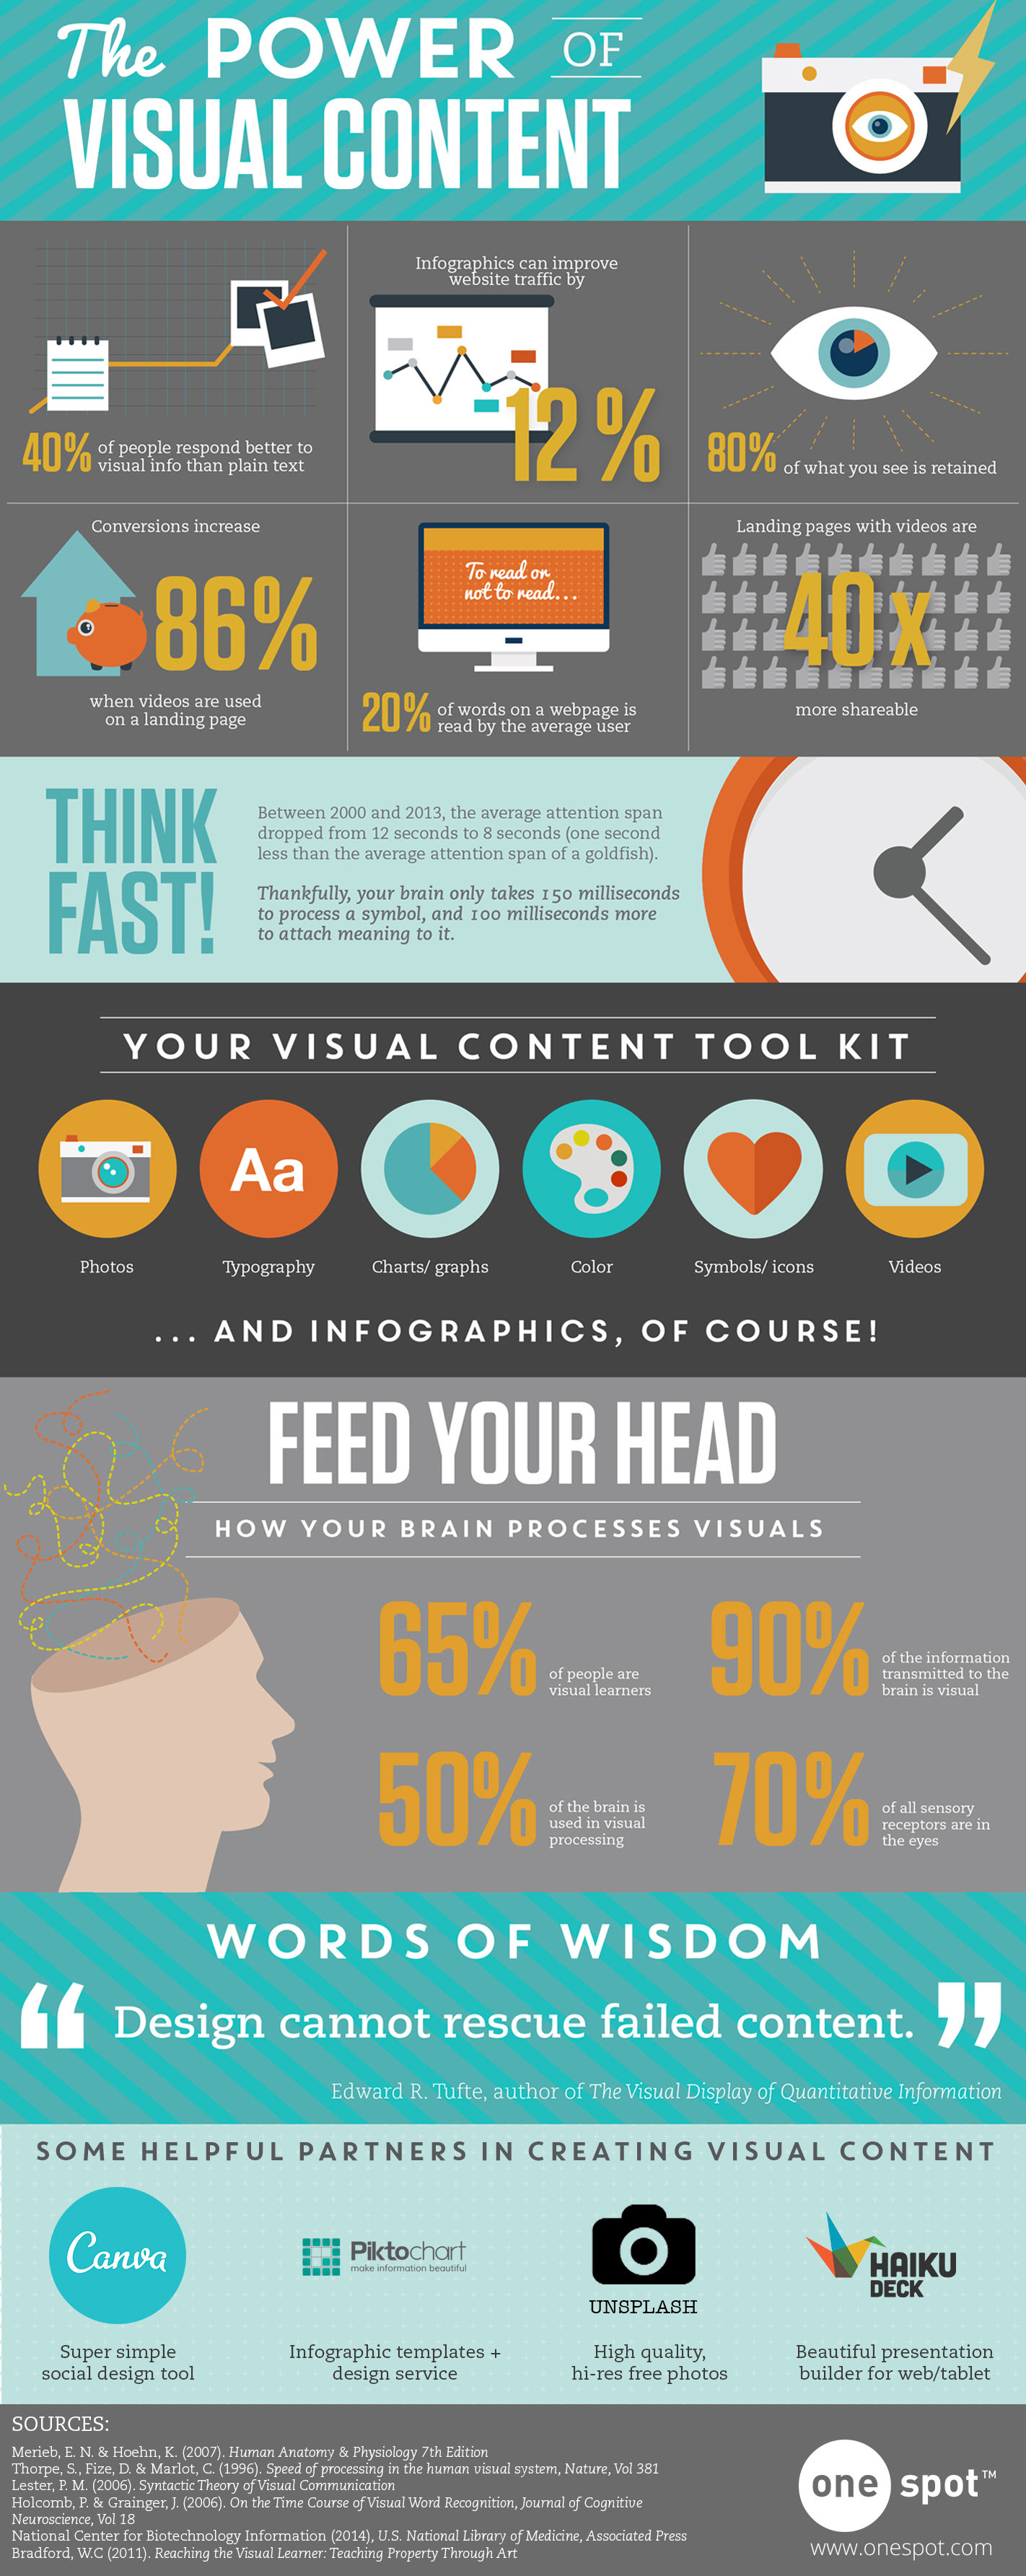 Infographic: The Power of Visual Content